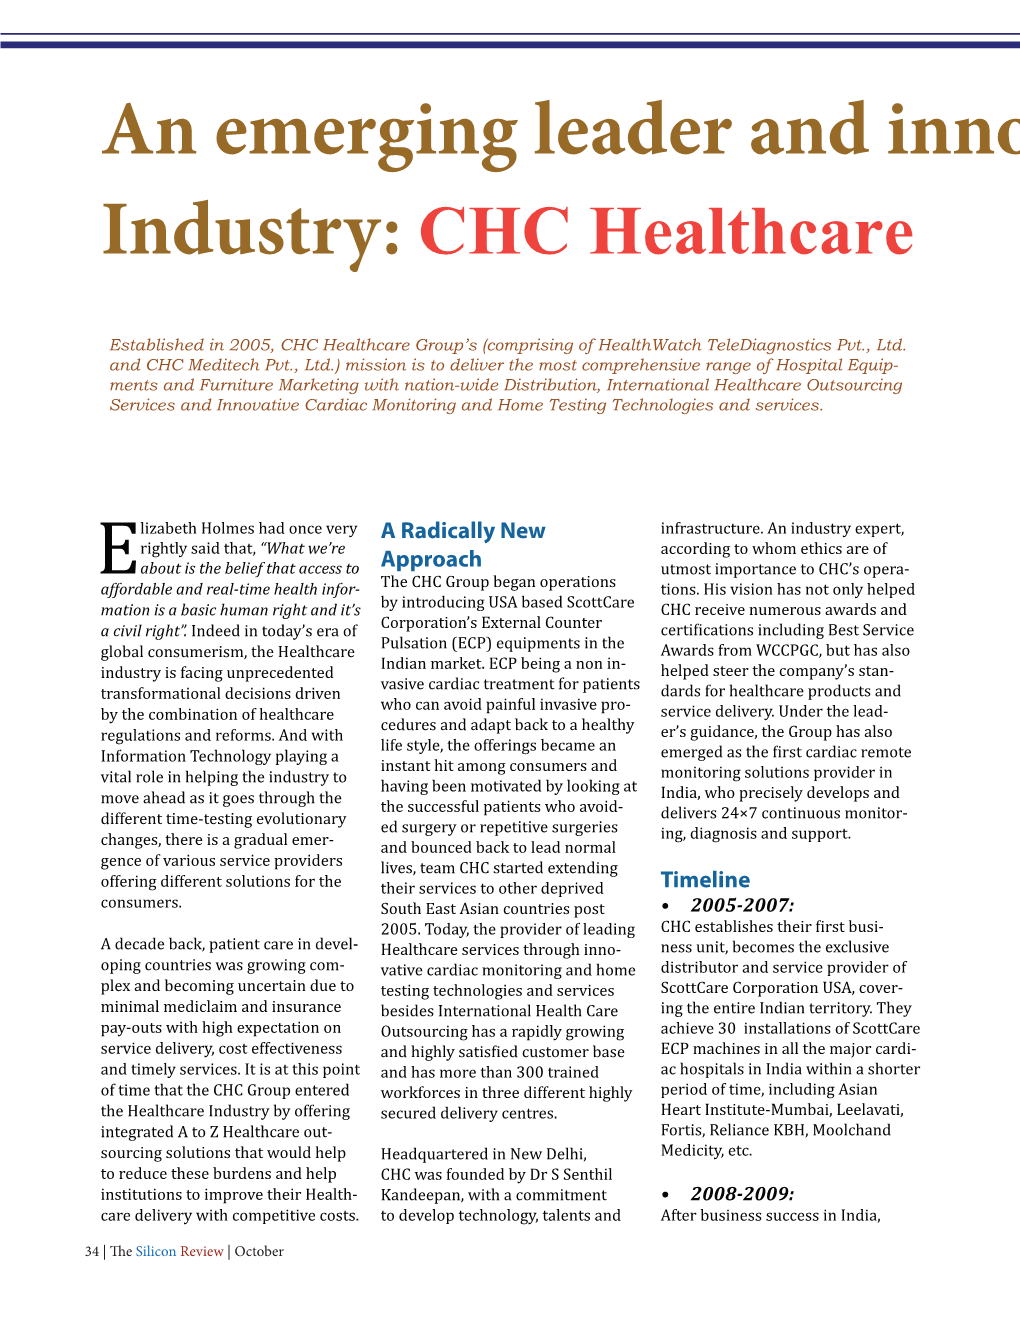 Industry: CHC Healthcare